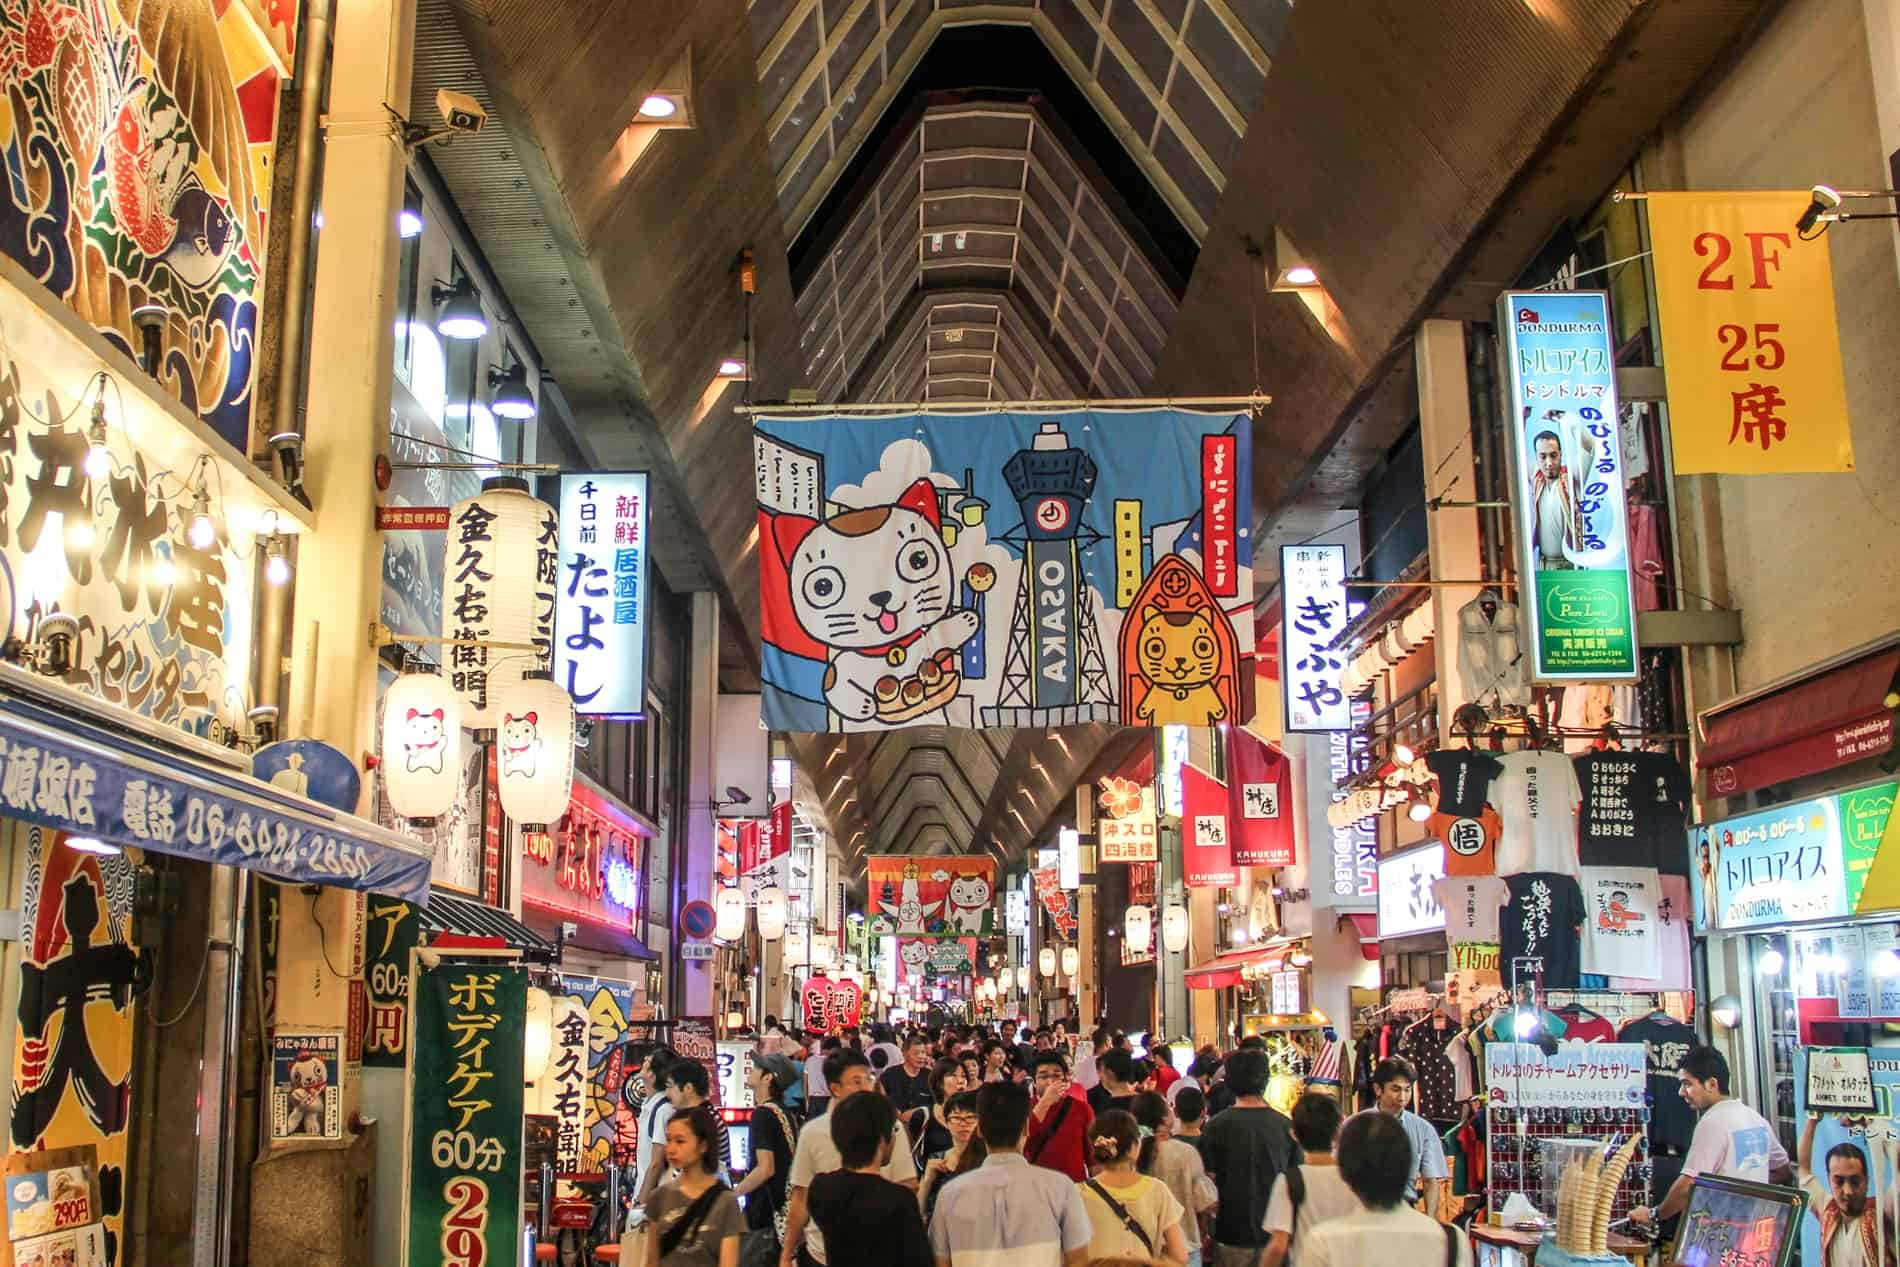 People fill a bright and colourful shopping arcade on Dotonburi Street, Osaka, lined with cartoon posters and lit-up signs. 